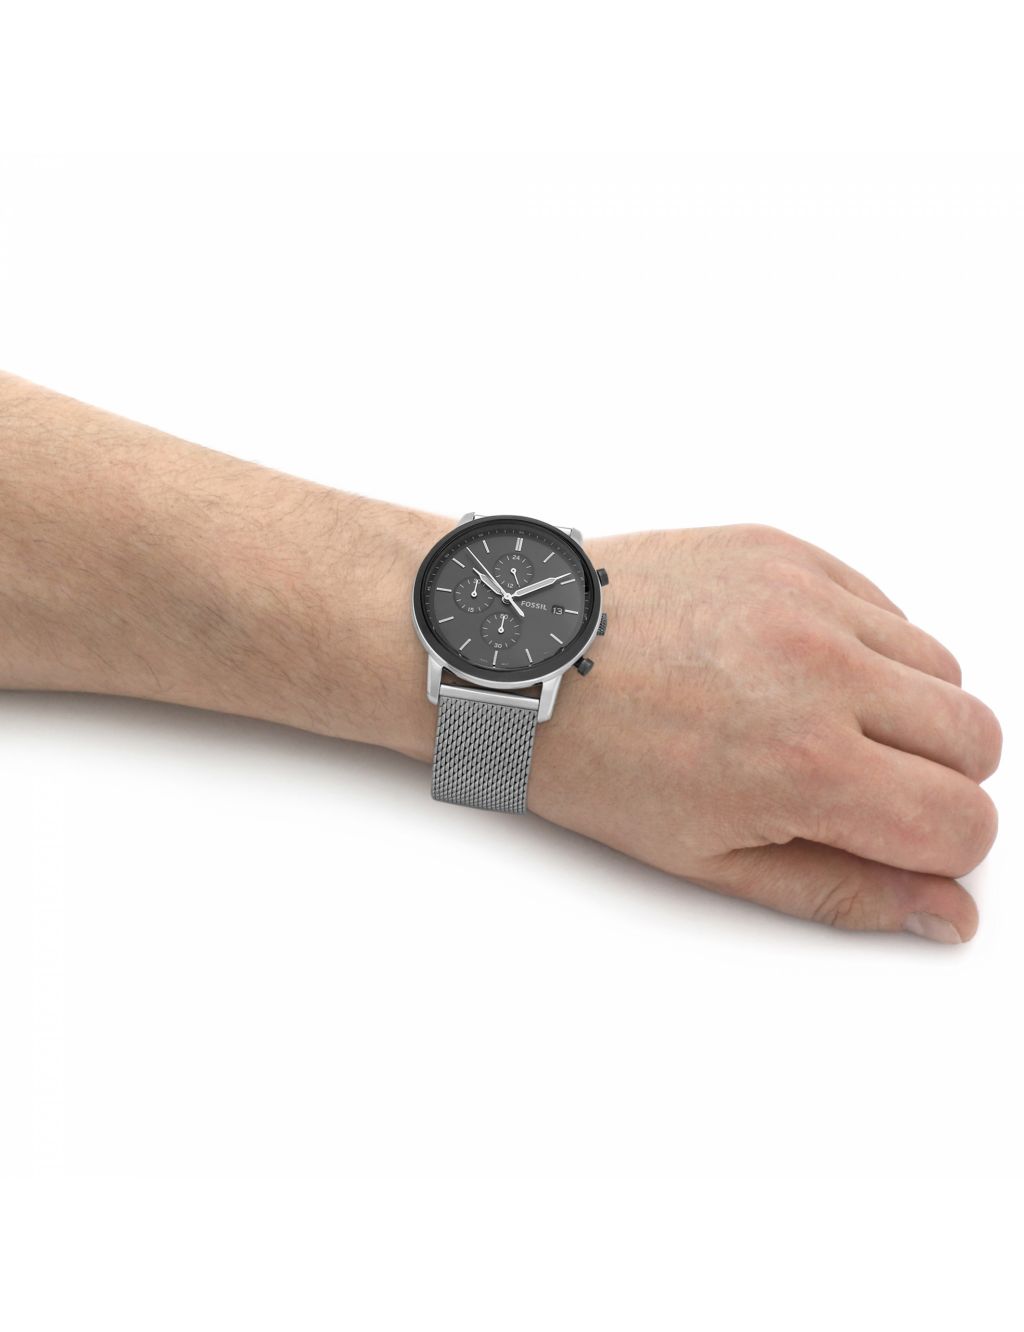 Fossil Minimalist Stainless Steel Watch image 5